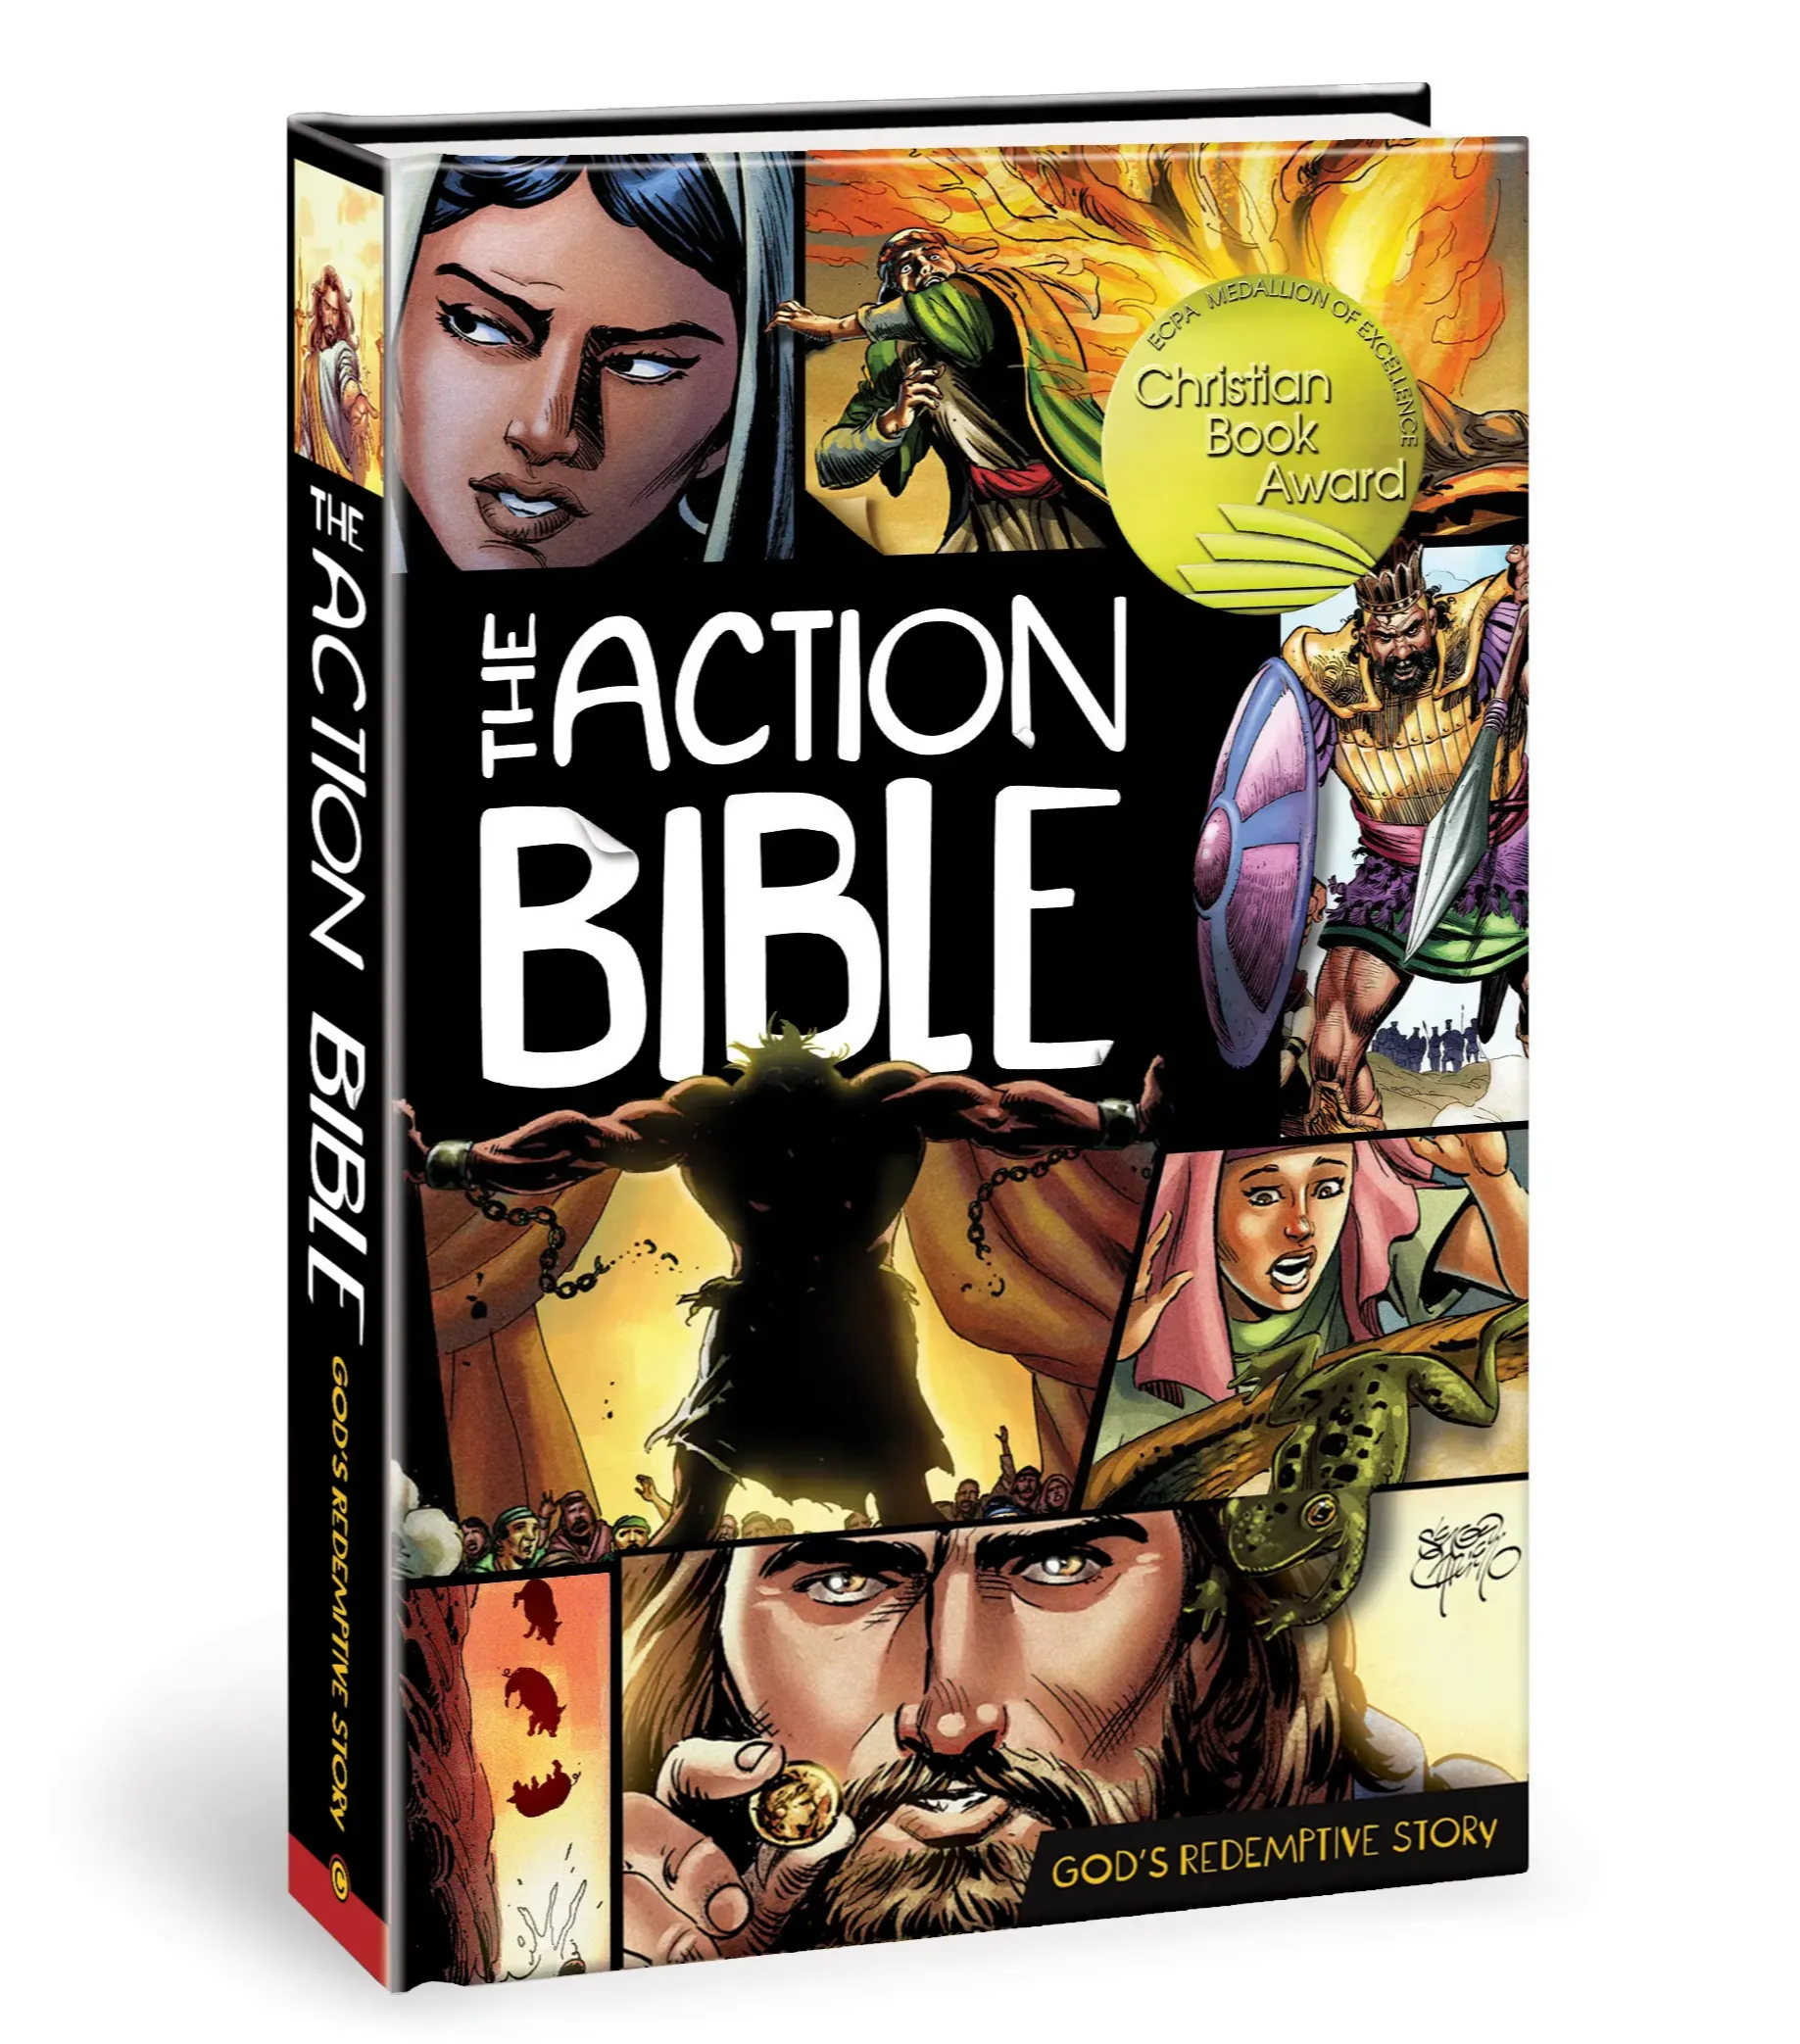 The Action bible illustrated bible for kids and teens